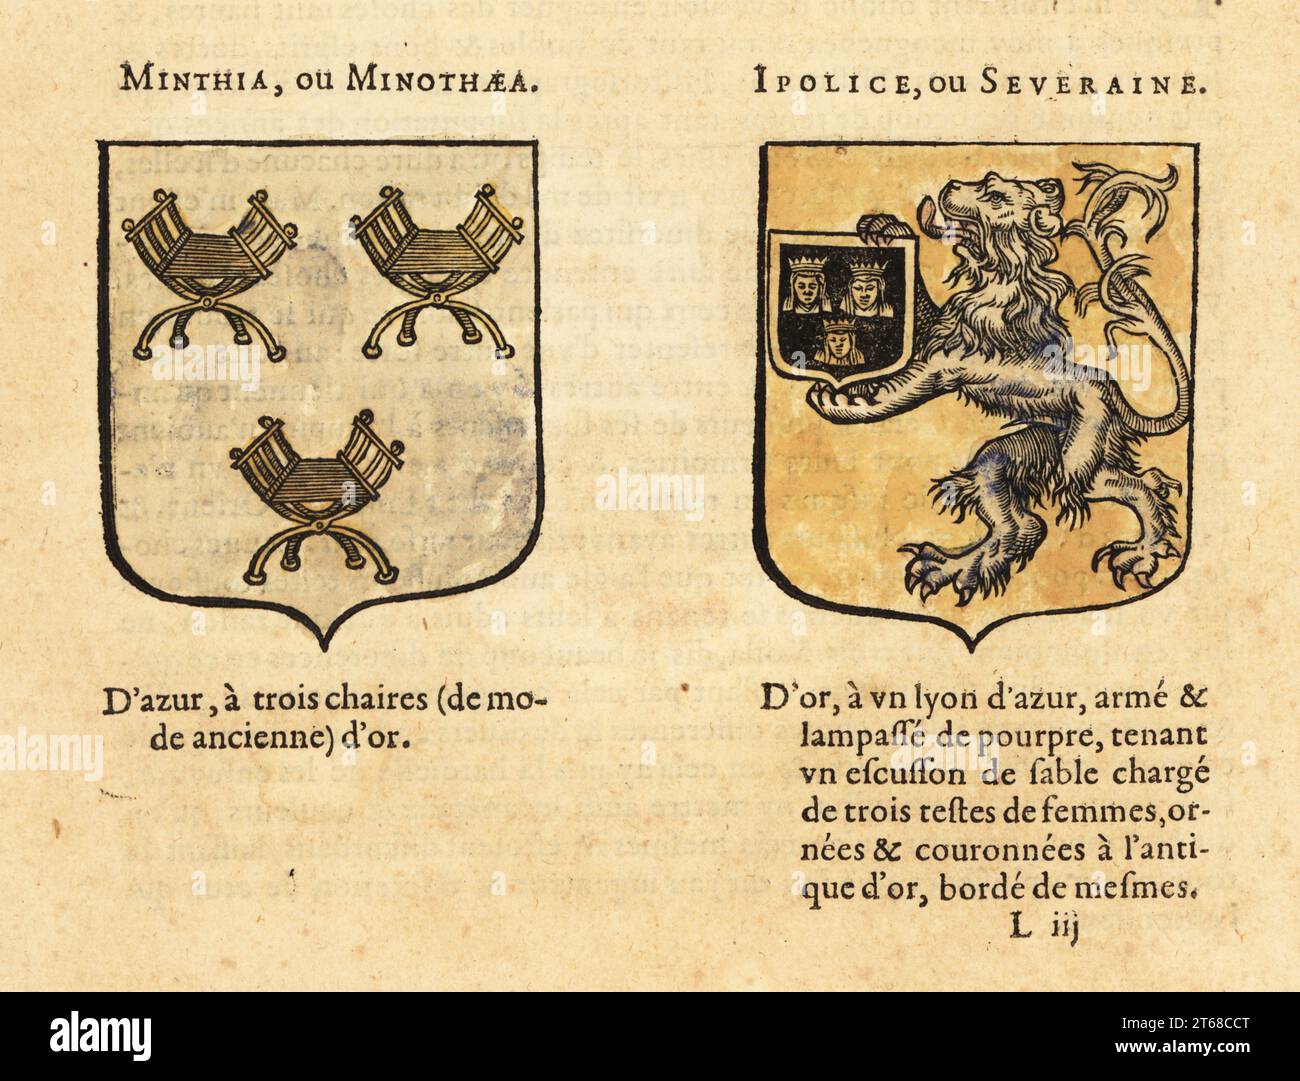 Imaginary coats of arms of Scythian queen Minothaea, with three gold chairs, and Amazon Queen Antiopes sister, Hippolyte, with blue lion rampant and three crowned queens. Nine Worthy Women. MINTHIA ou MINOTHAEA, IPOLICE ou SEVERAINE. Handcoloured woodblock engraving from Hierosme de Baras Le Blason des Armoiries, Chez Rolet Boutonne, Paris, 1628. Stock Photo